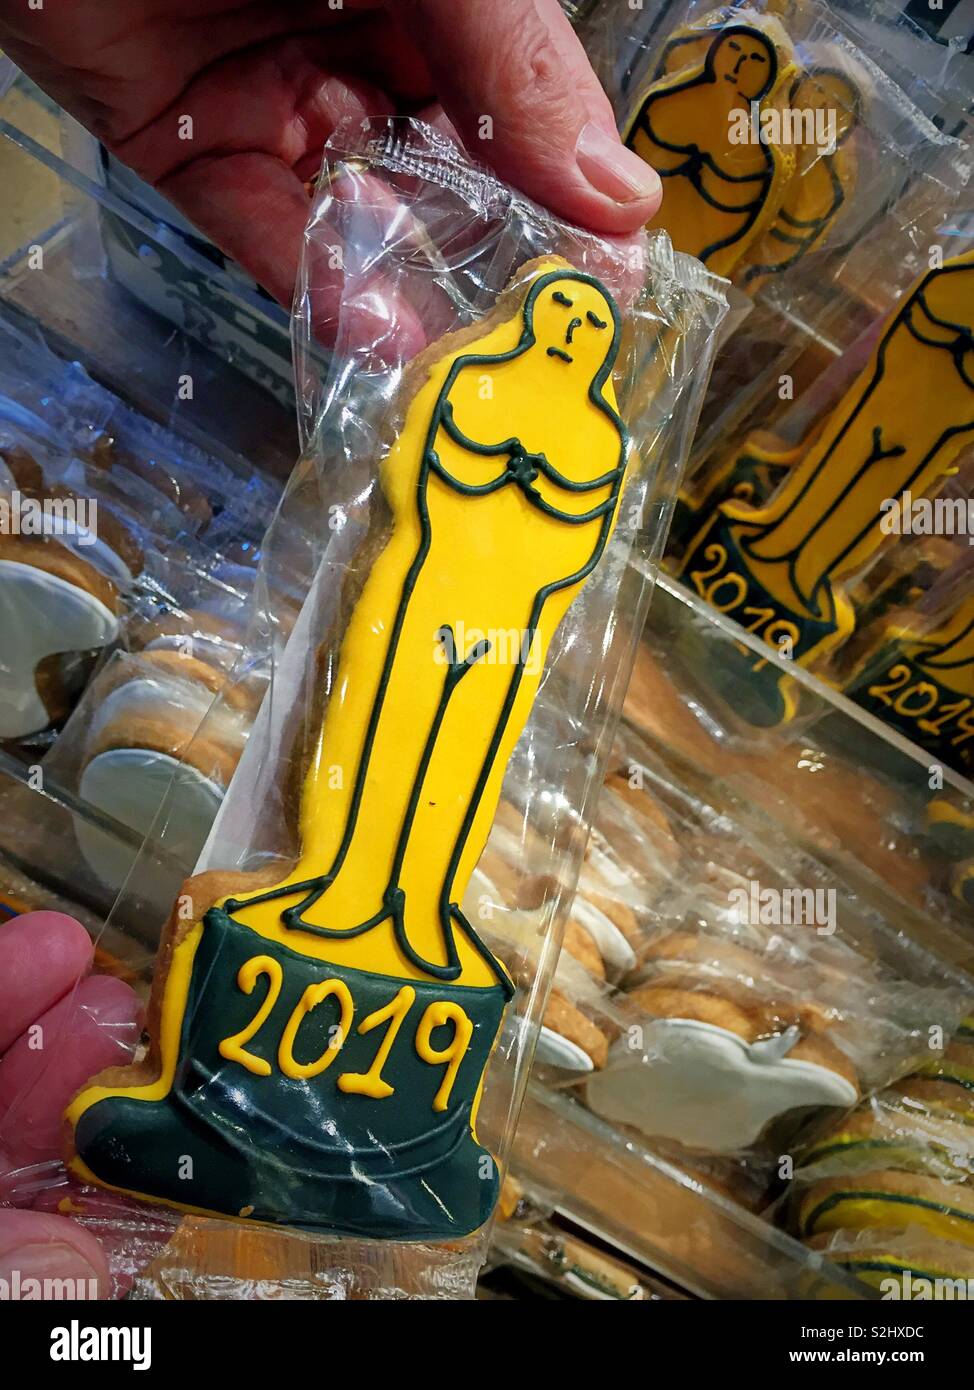 Gold Oscar statue shaped cookie for sale in a New York City bakery, NYC, USA Stock Photo